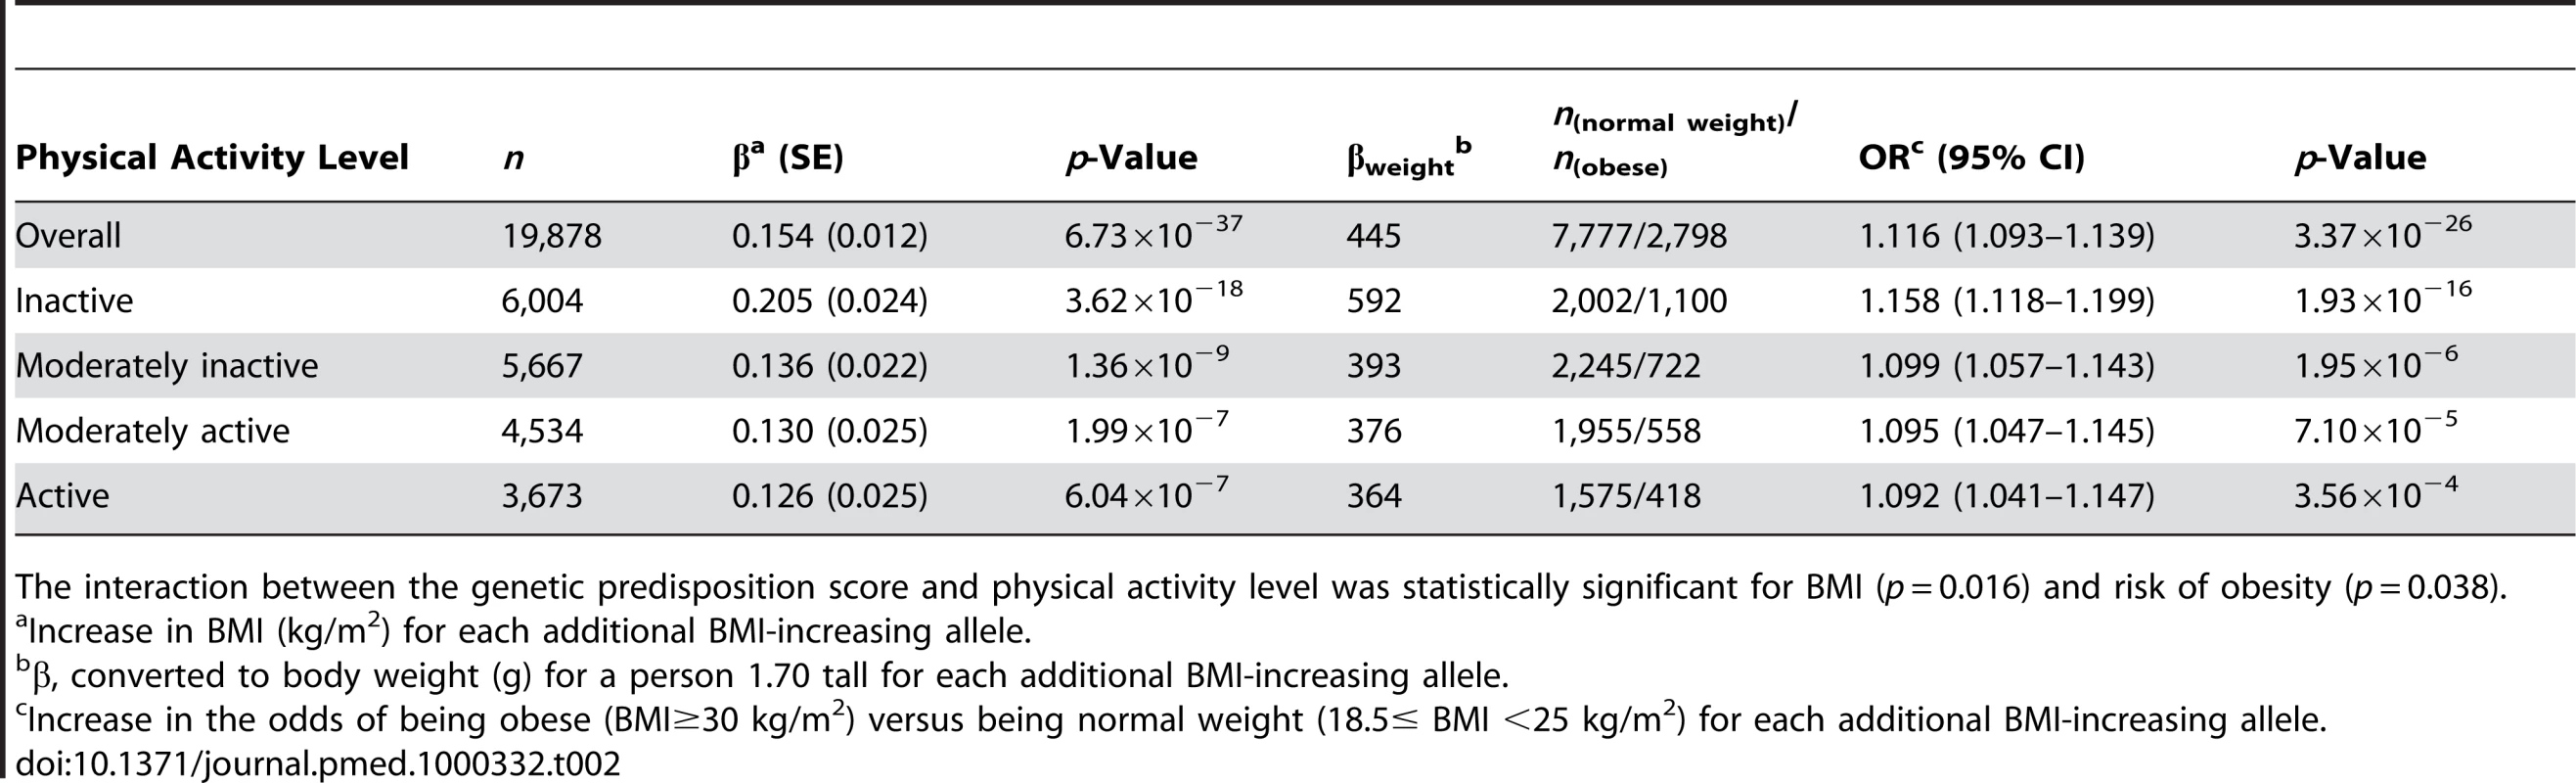 Associations of the genetic predisposition score with BMI and risk of obesity in the total population and stratified by physical activity level.